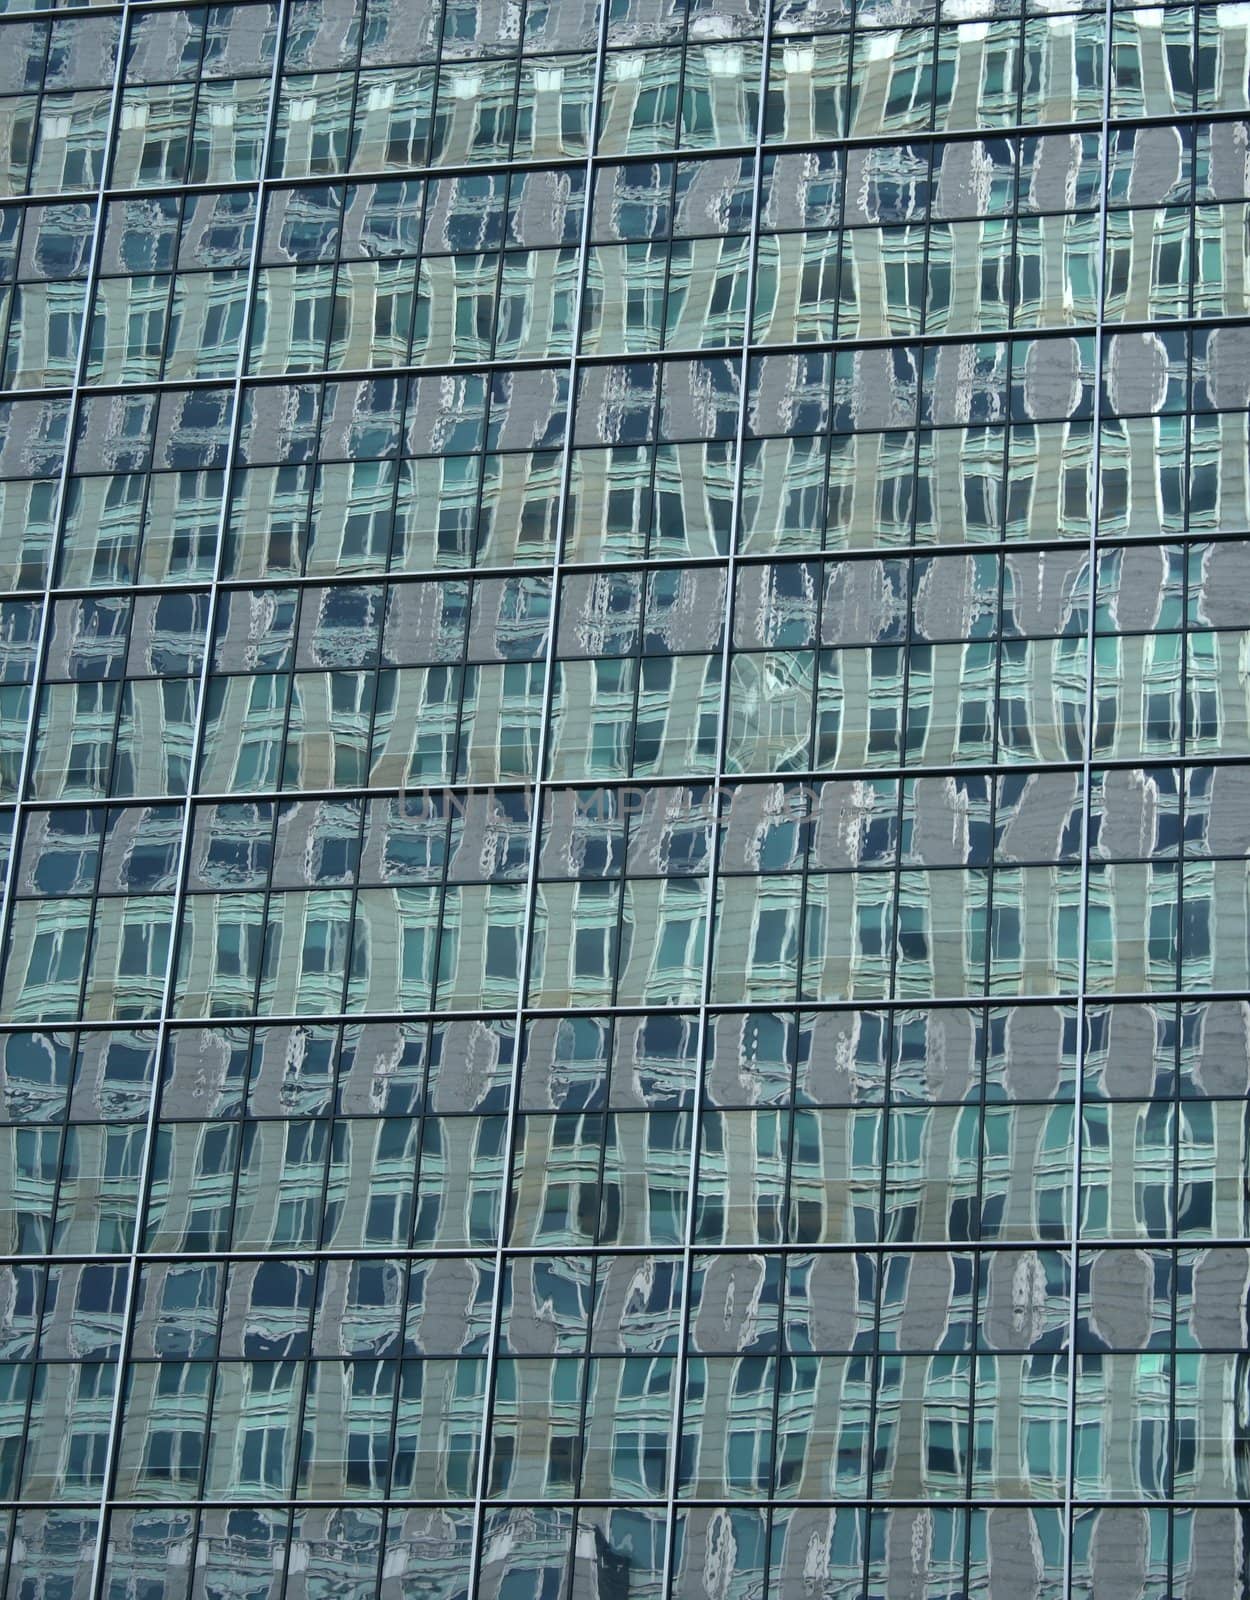 Abstract green reflections in the windows of a skyscraper.